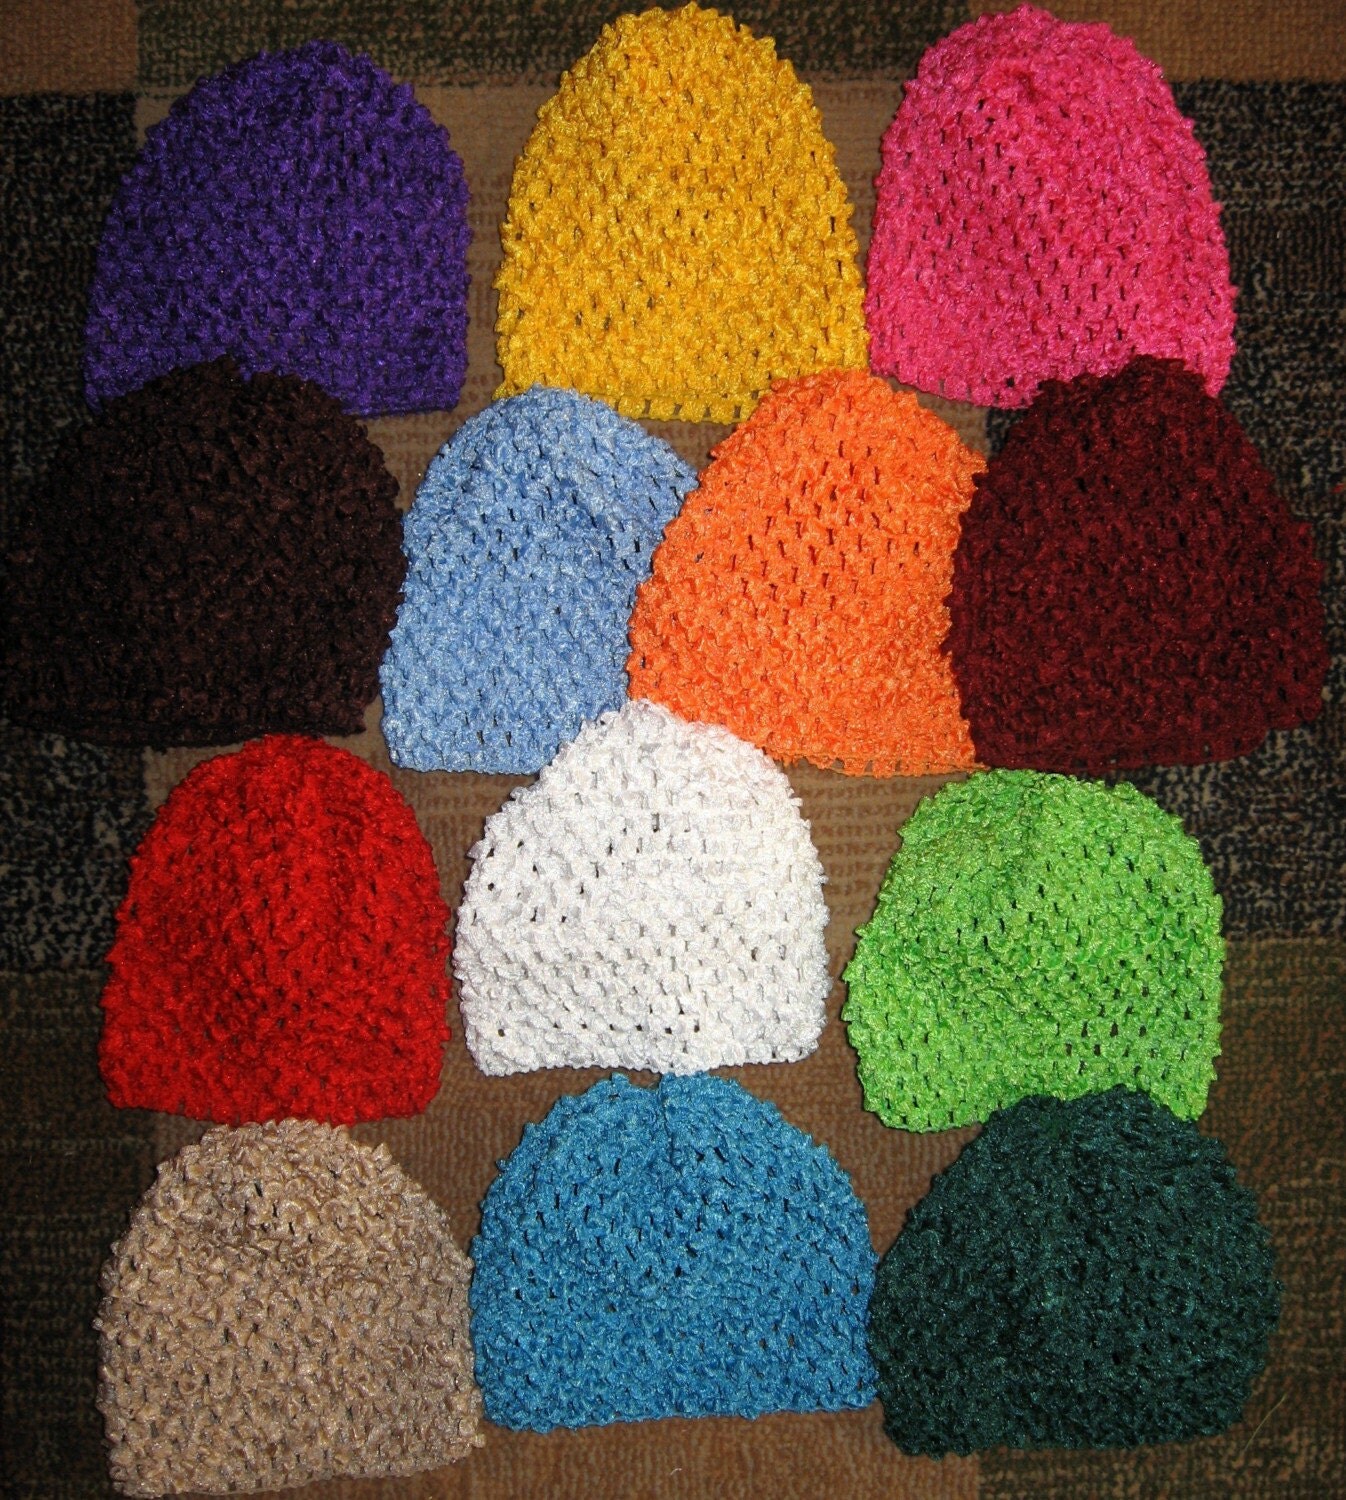 Crochet -- Learn How to Crochet -- Find Free Patterns for Crocheting